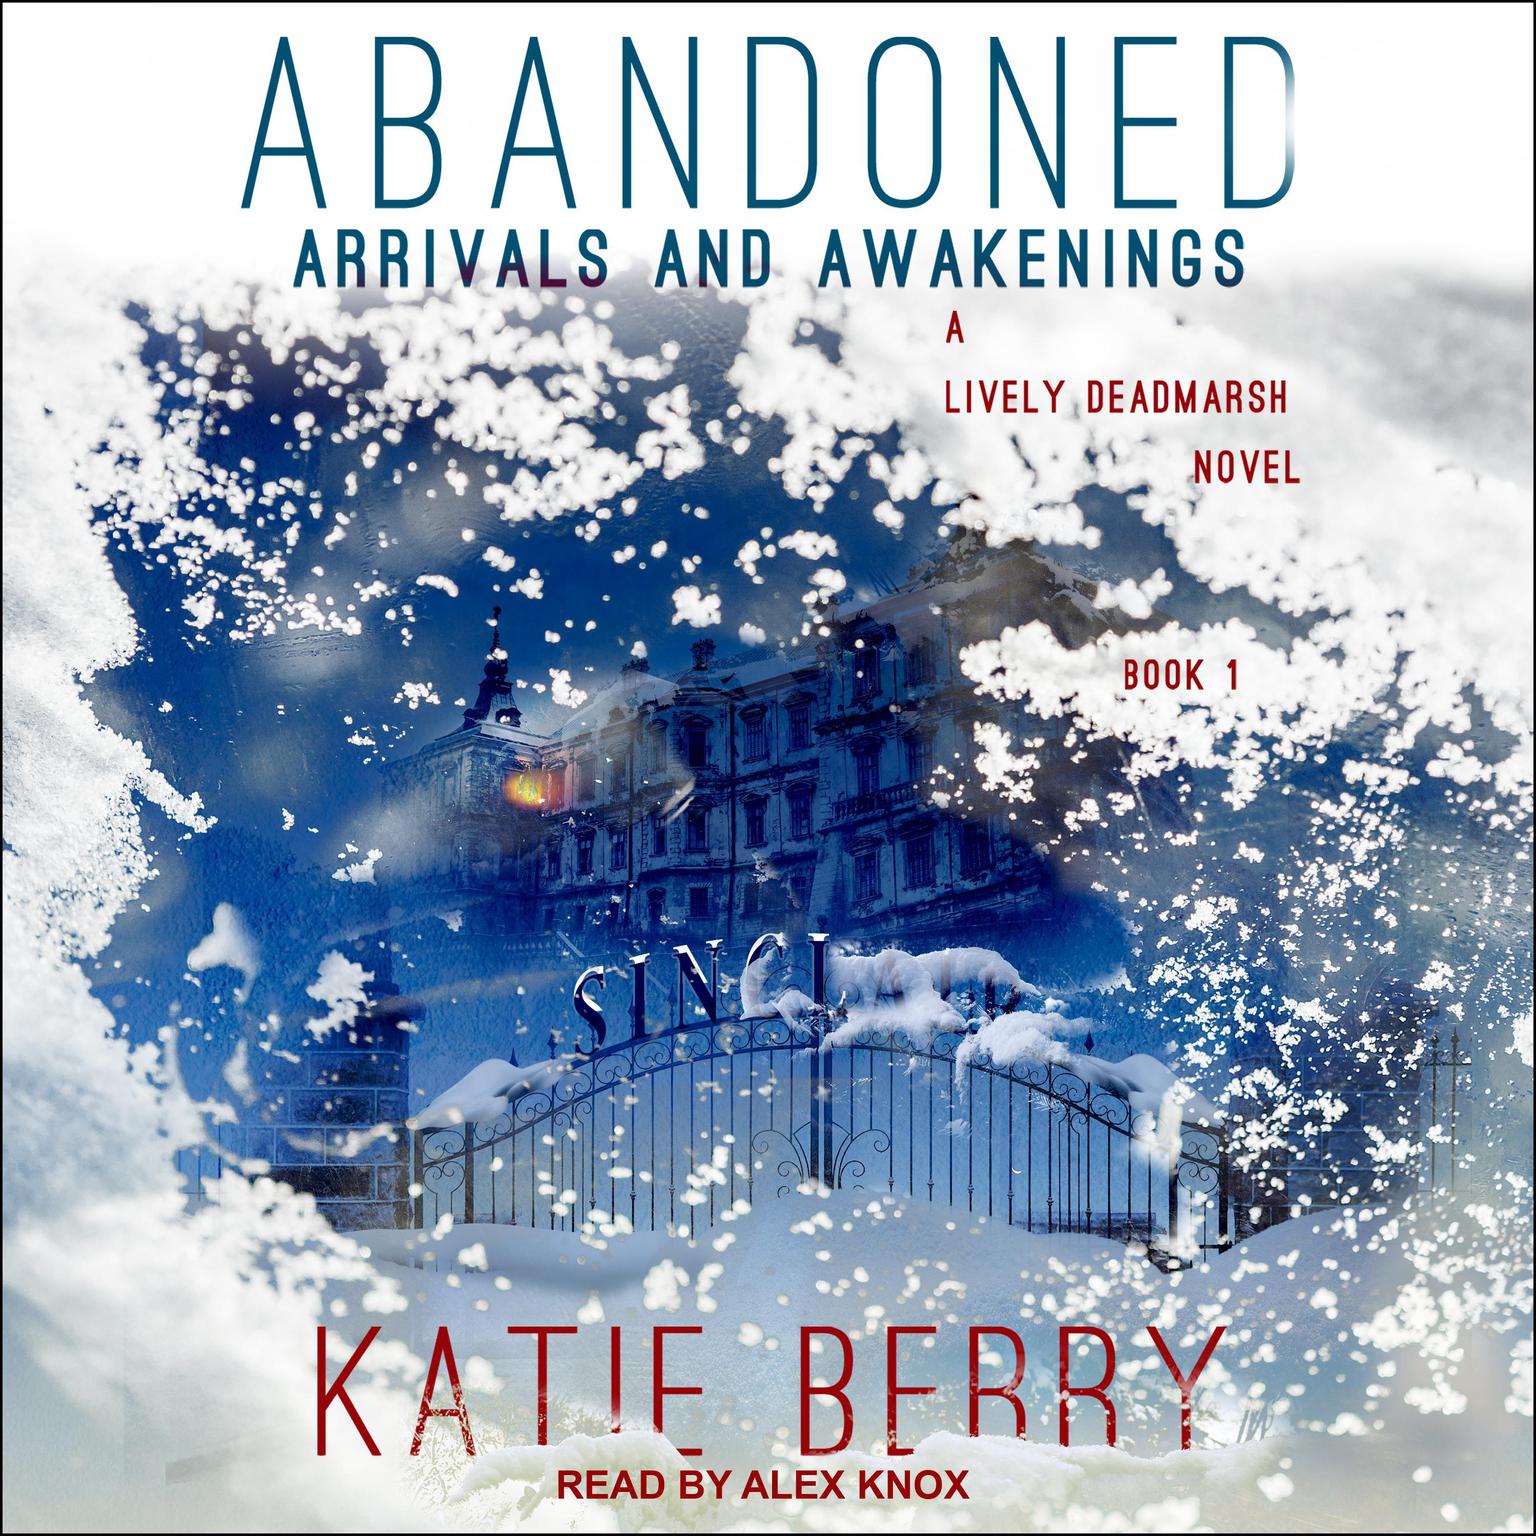 ABANDONED: A Lively Deadmarsh Novel Book 1 – Arrivals and Awakenings Audiobook, by Katie Berry